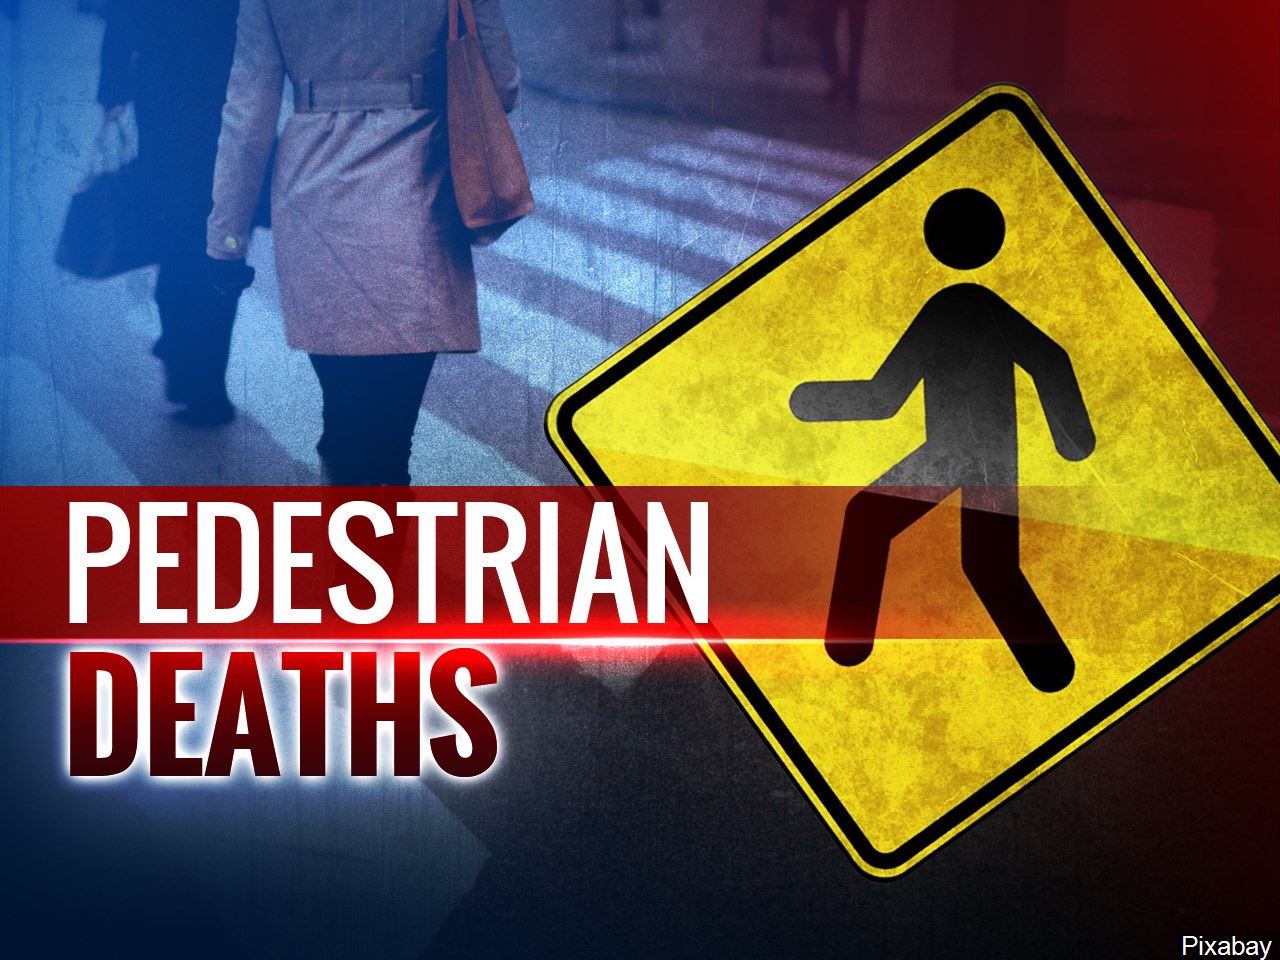 Number of pedestrians killed in crashes increased in 2020